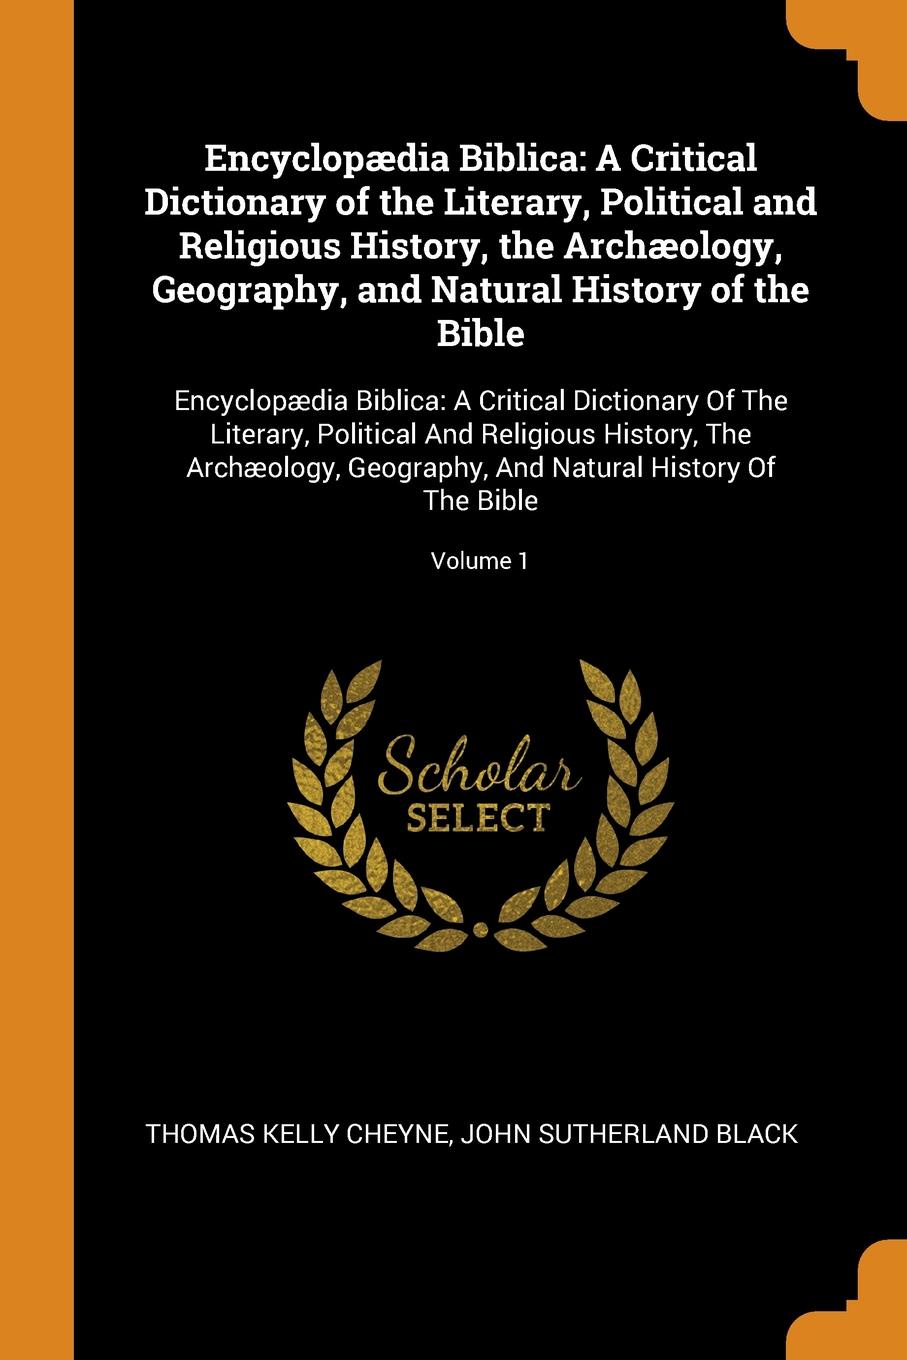 Encyclopaedia Biblica. A Critical Dictionary of the Literary, Political and Religious History, the Archaeology, Geography, and Natural History of the Bible: Encyclopaedia Biblica: A Critical Dictionary Of The Literary, Political And Religious Hist...